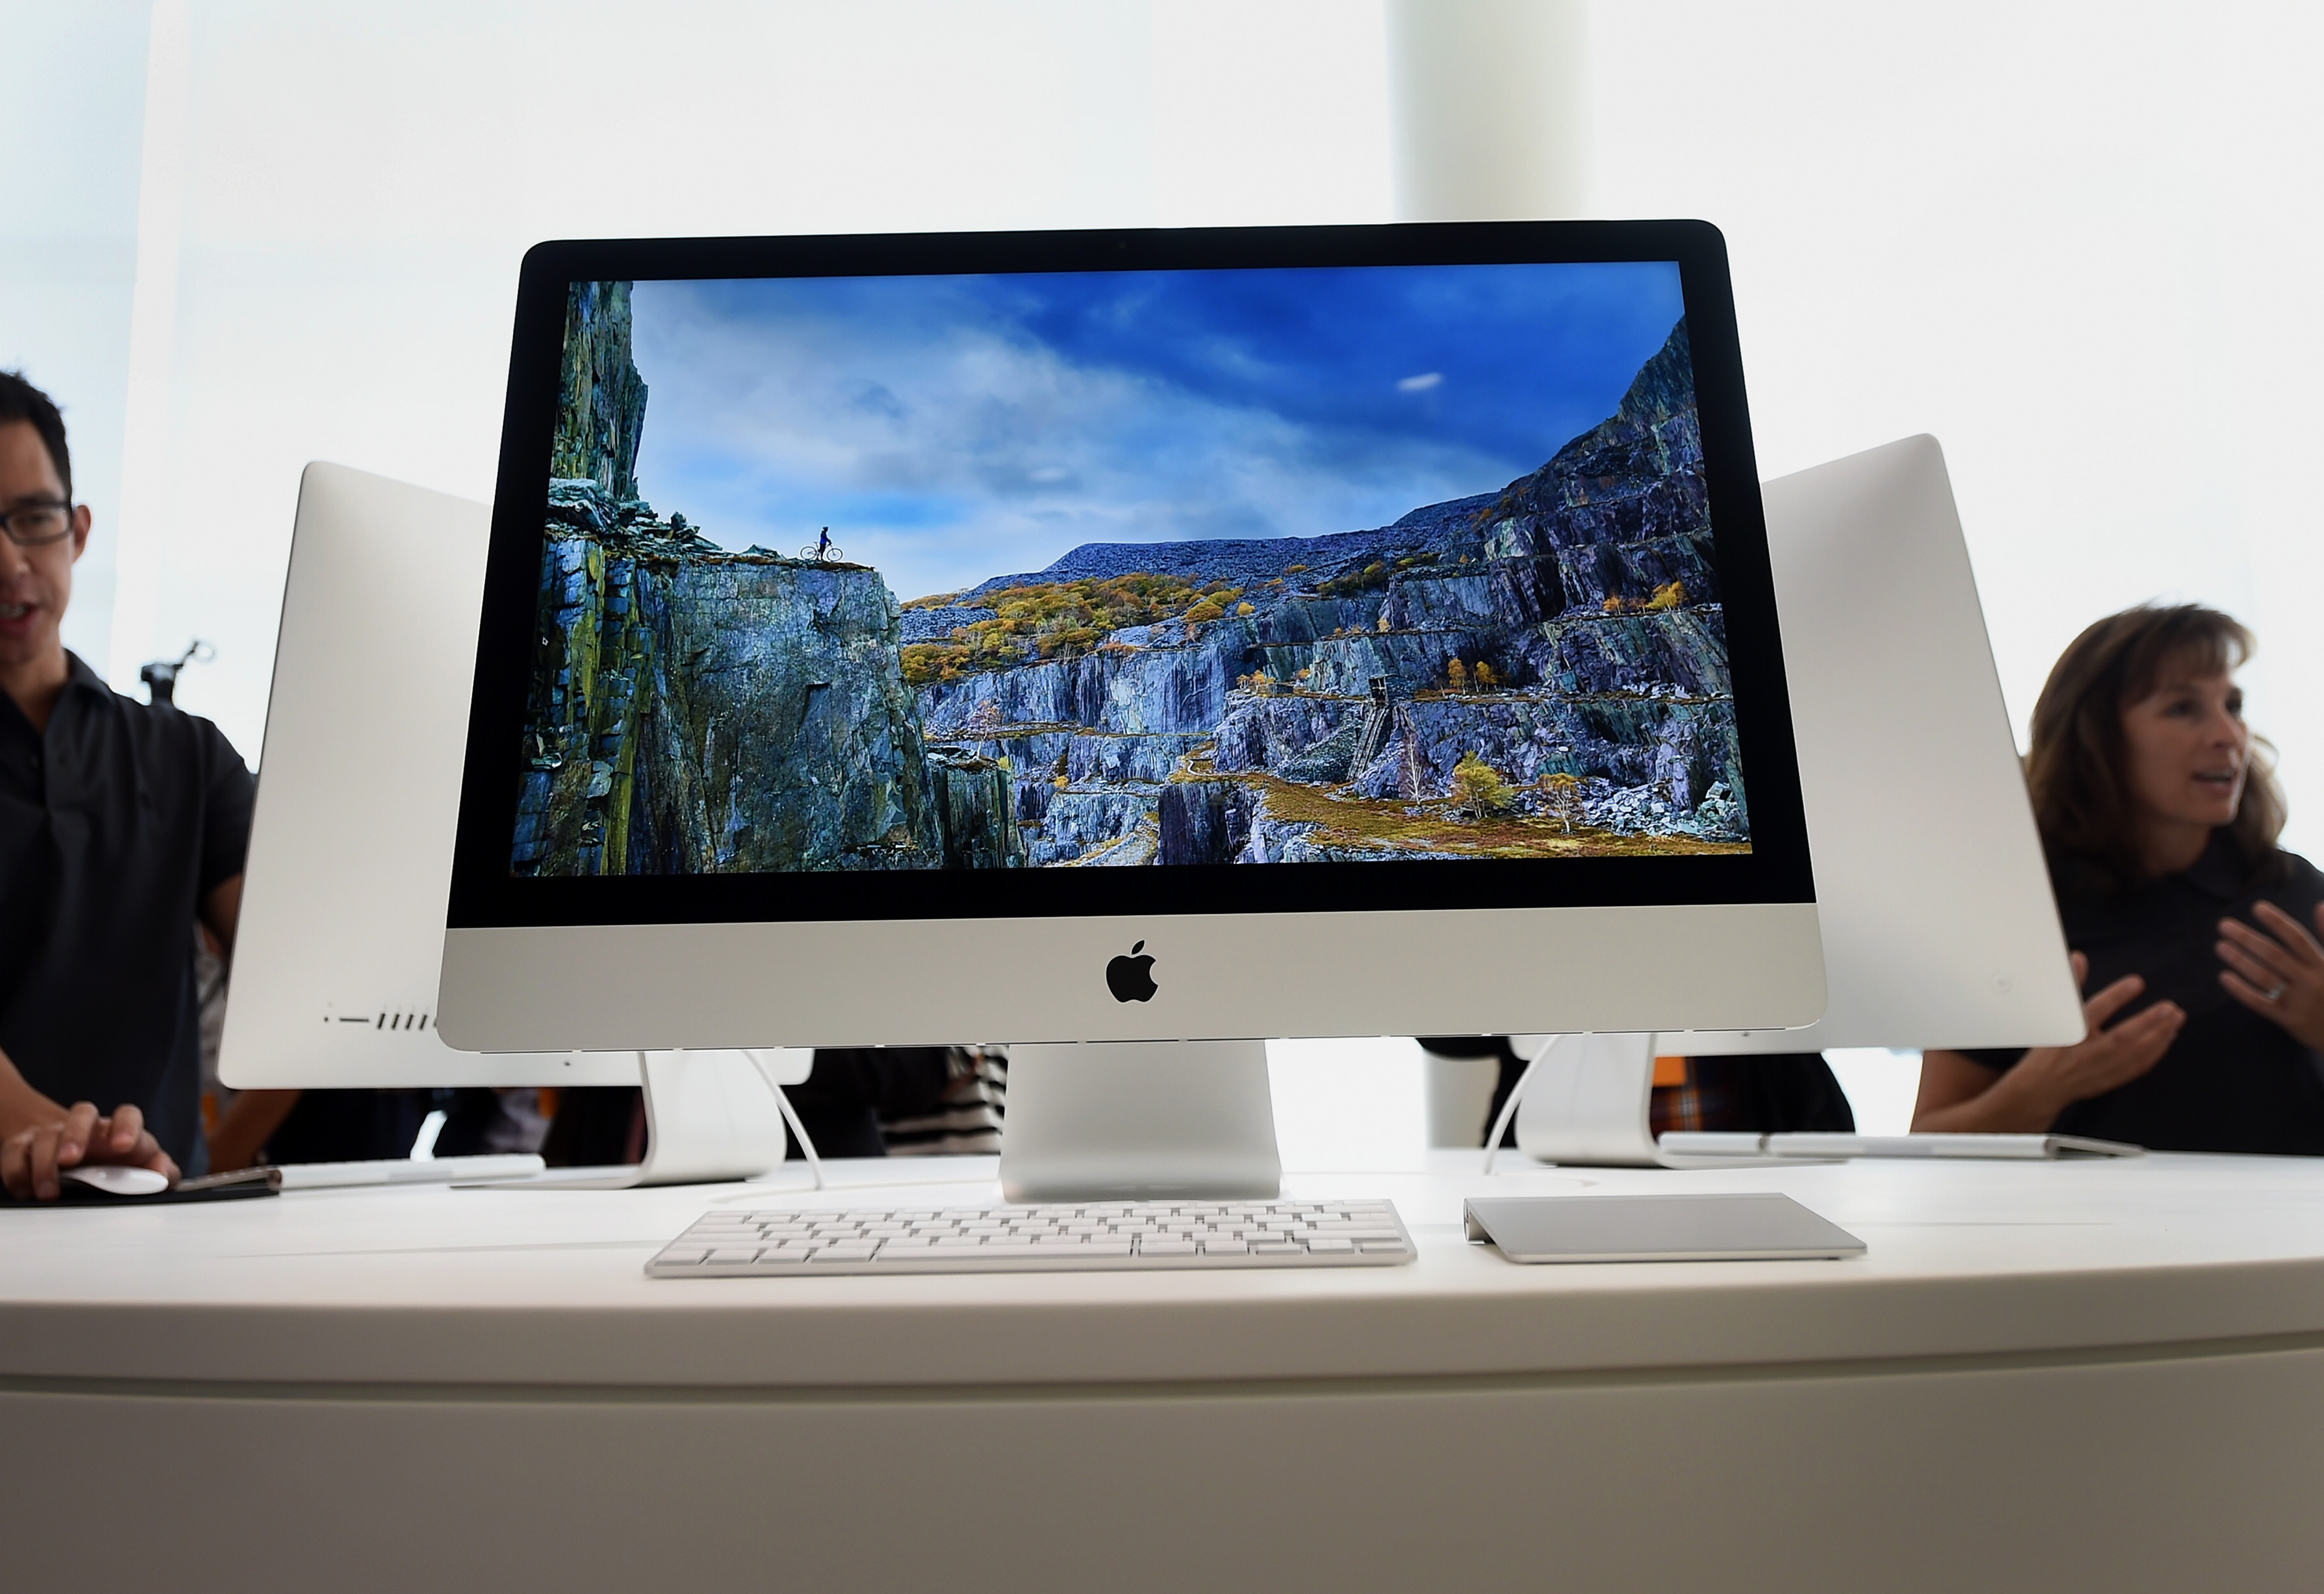 The 27-inch Apple Inc. iMac computer with 5K retina display is displayed after a product announcement in Cupertino, California, U.S., on Thursday, Oct. 16, 2014. (Bloomberg&mdash;Bloomberg via Getty Images)